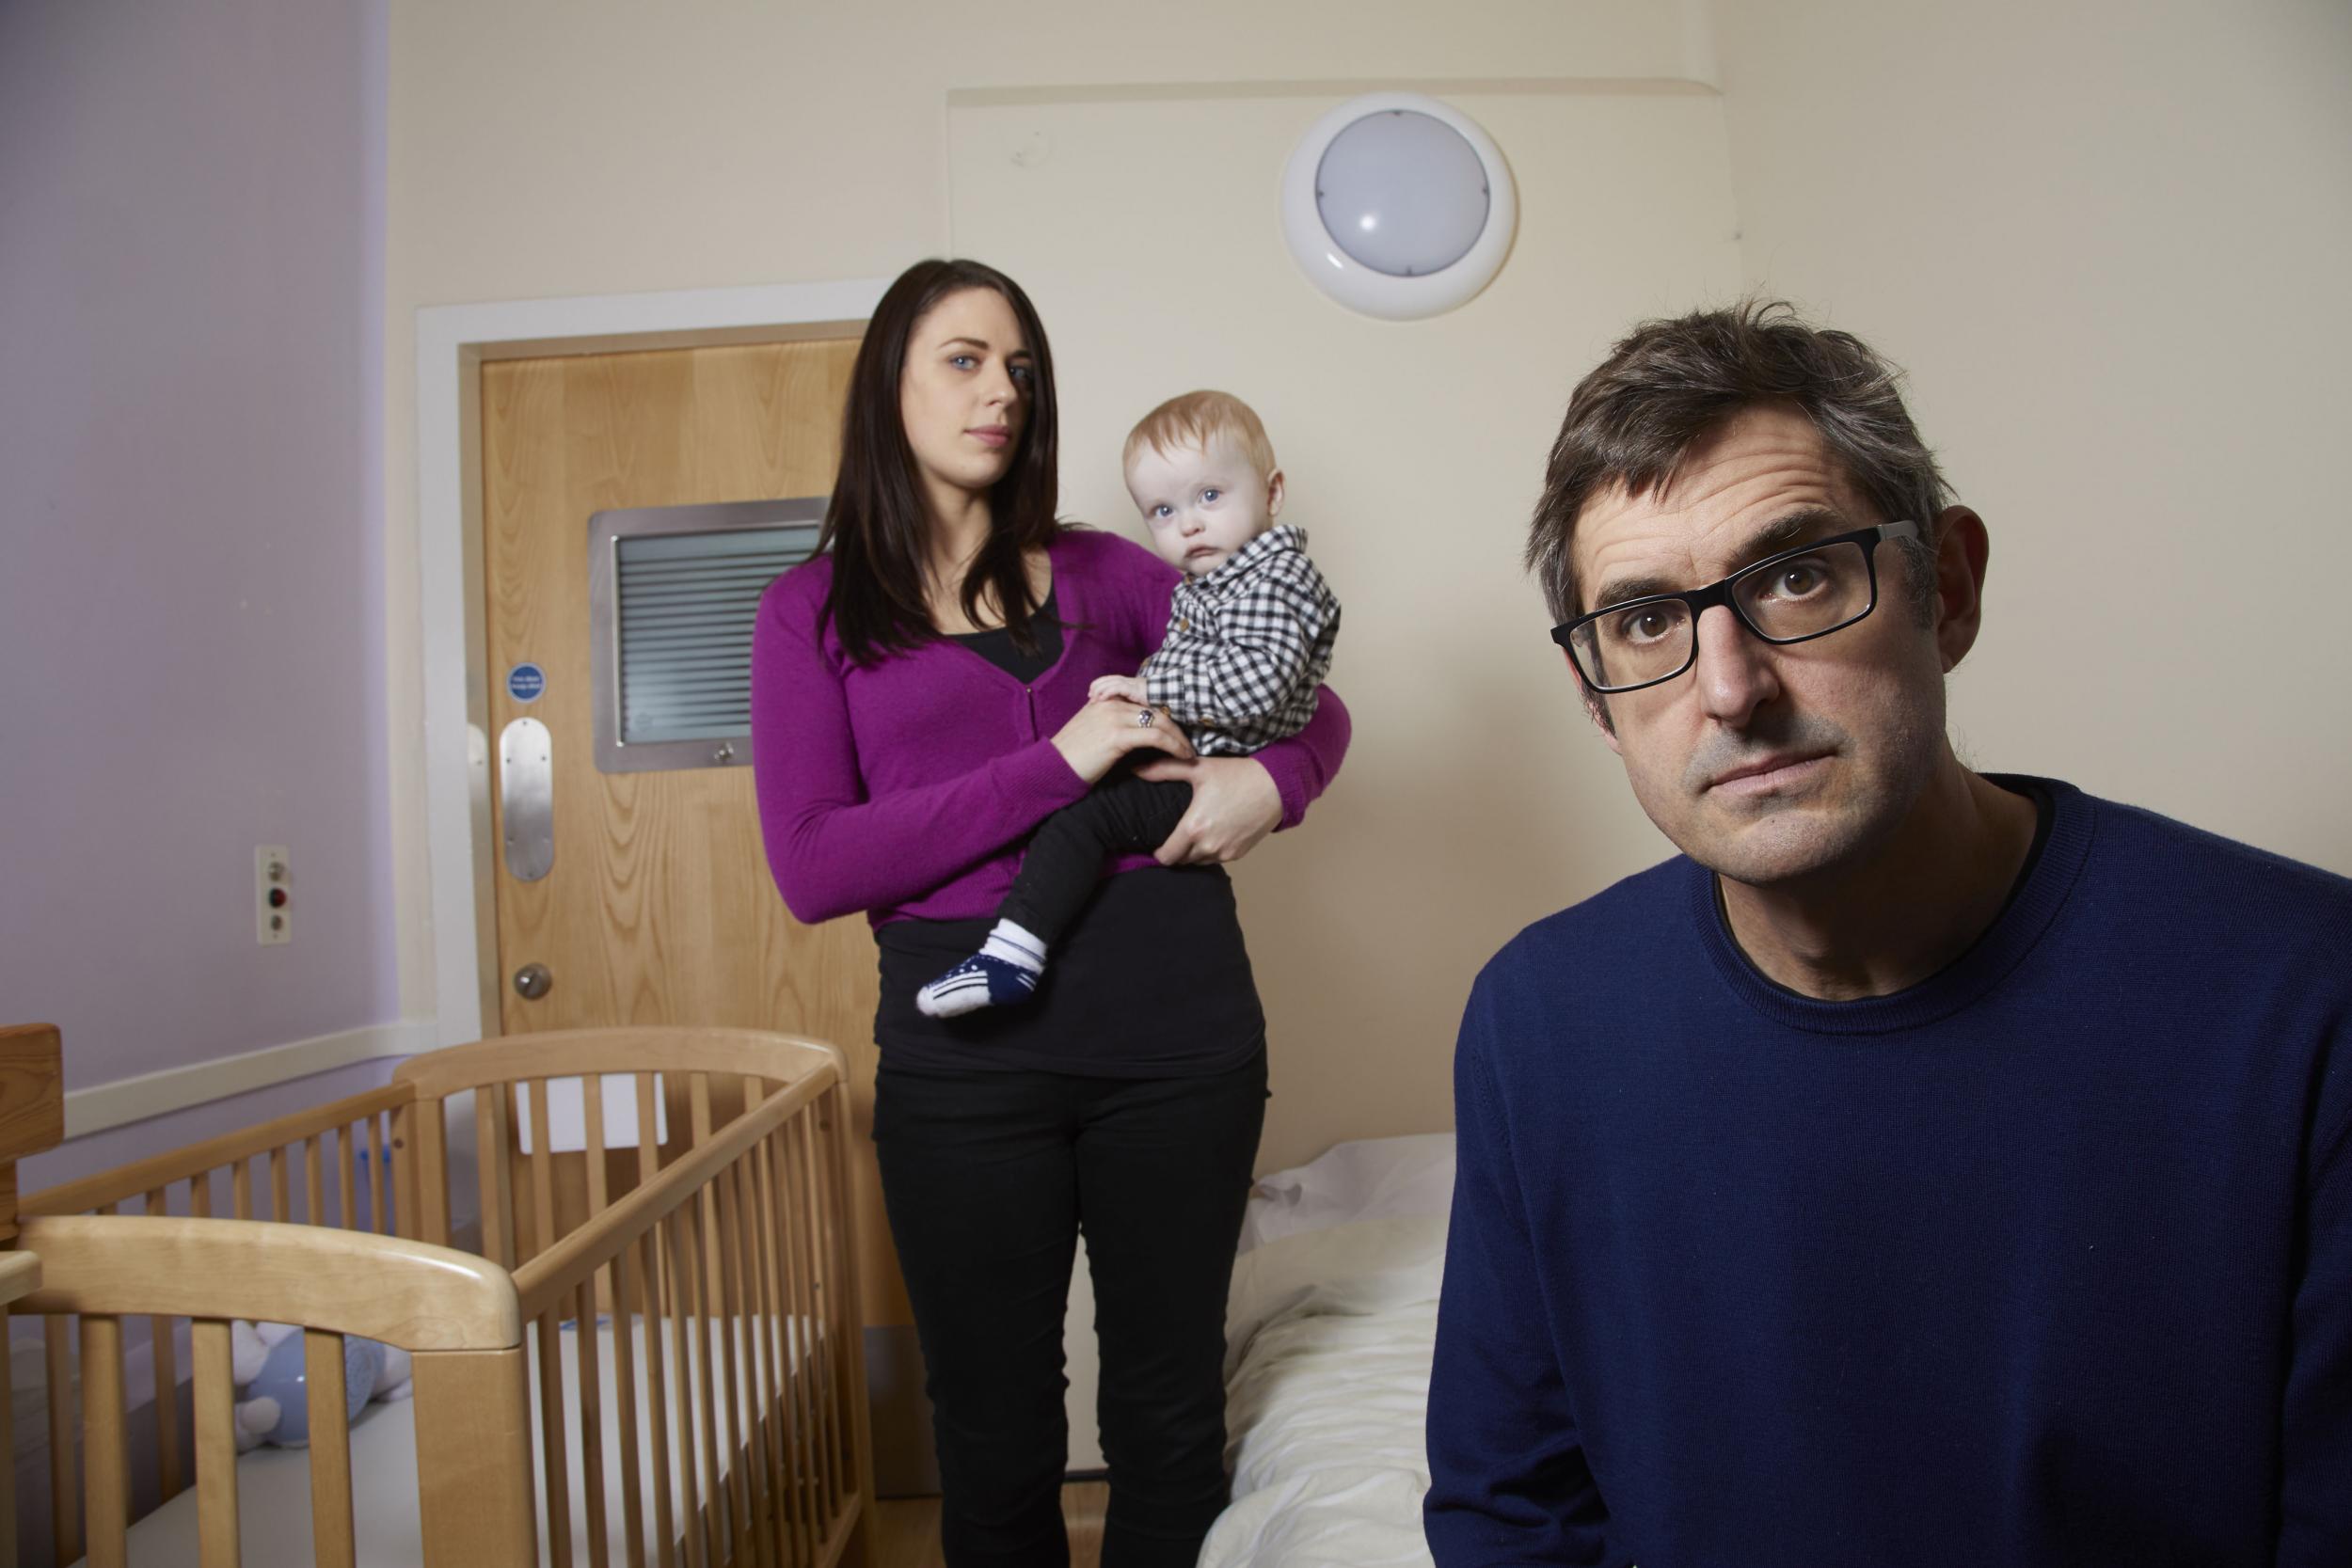 Louis Theroux’s latest offering deals with psychiatric episodes in motherhood